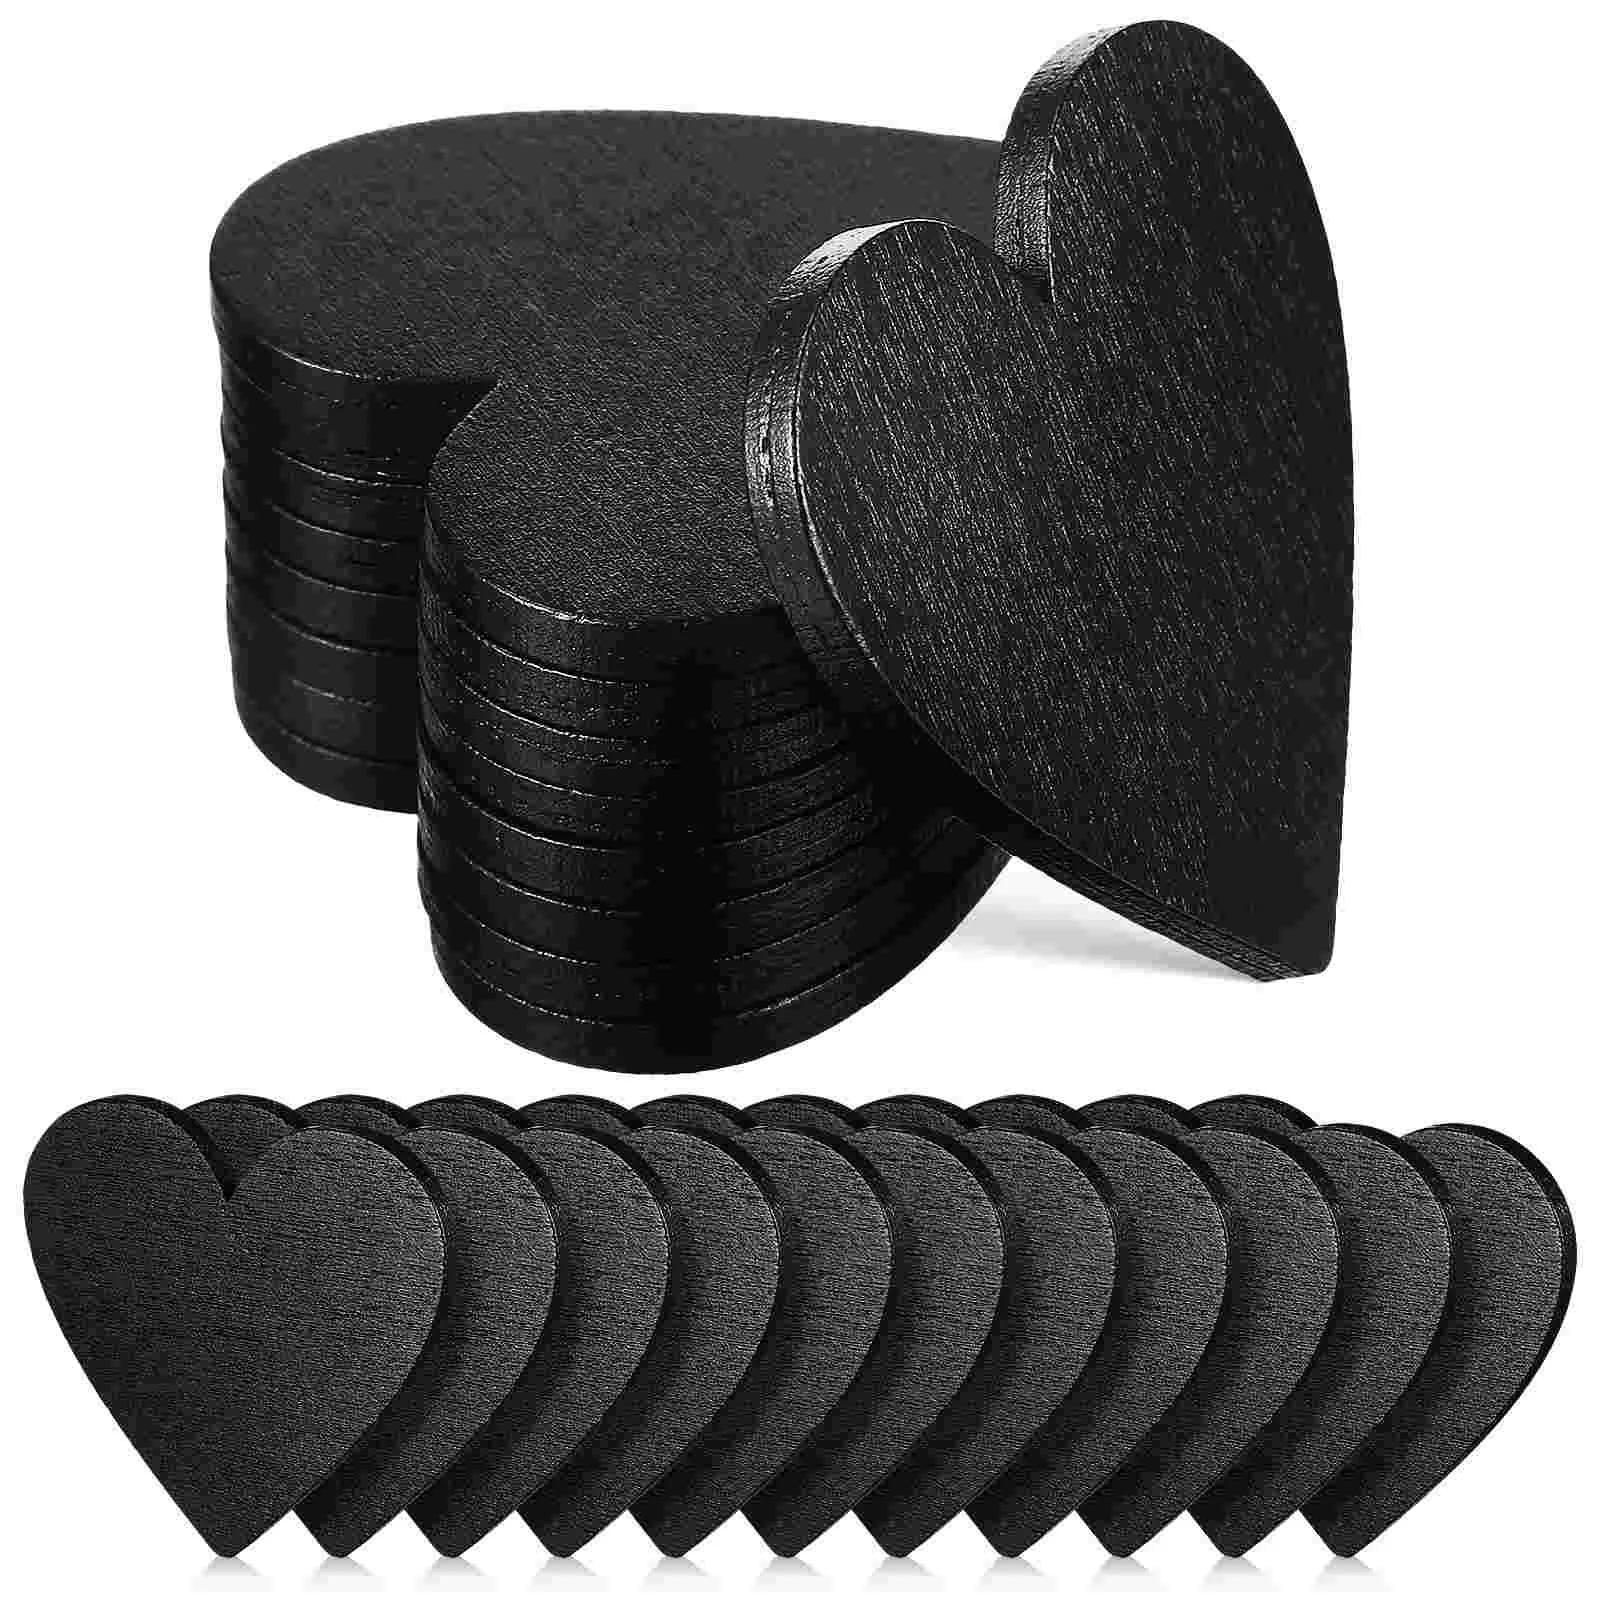 

20 Pcs Heart Shaped Blackboard Wedding Decor Wood Love-heart Label Embellishments Wooden Hearts for Crafting Small Discs Shapes